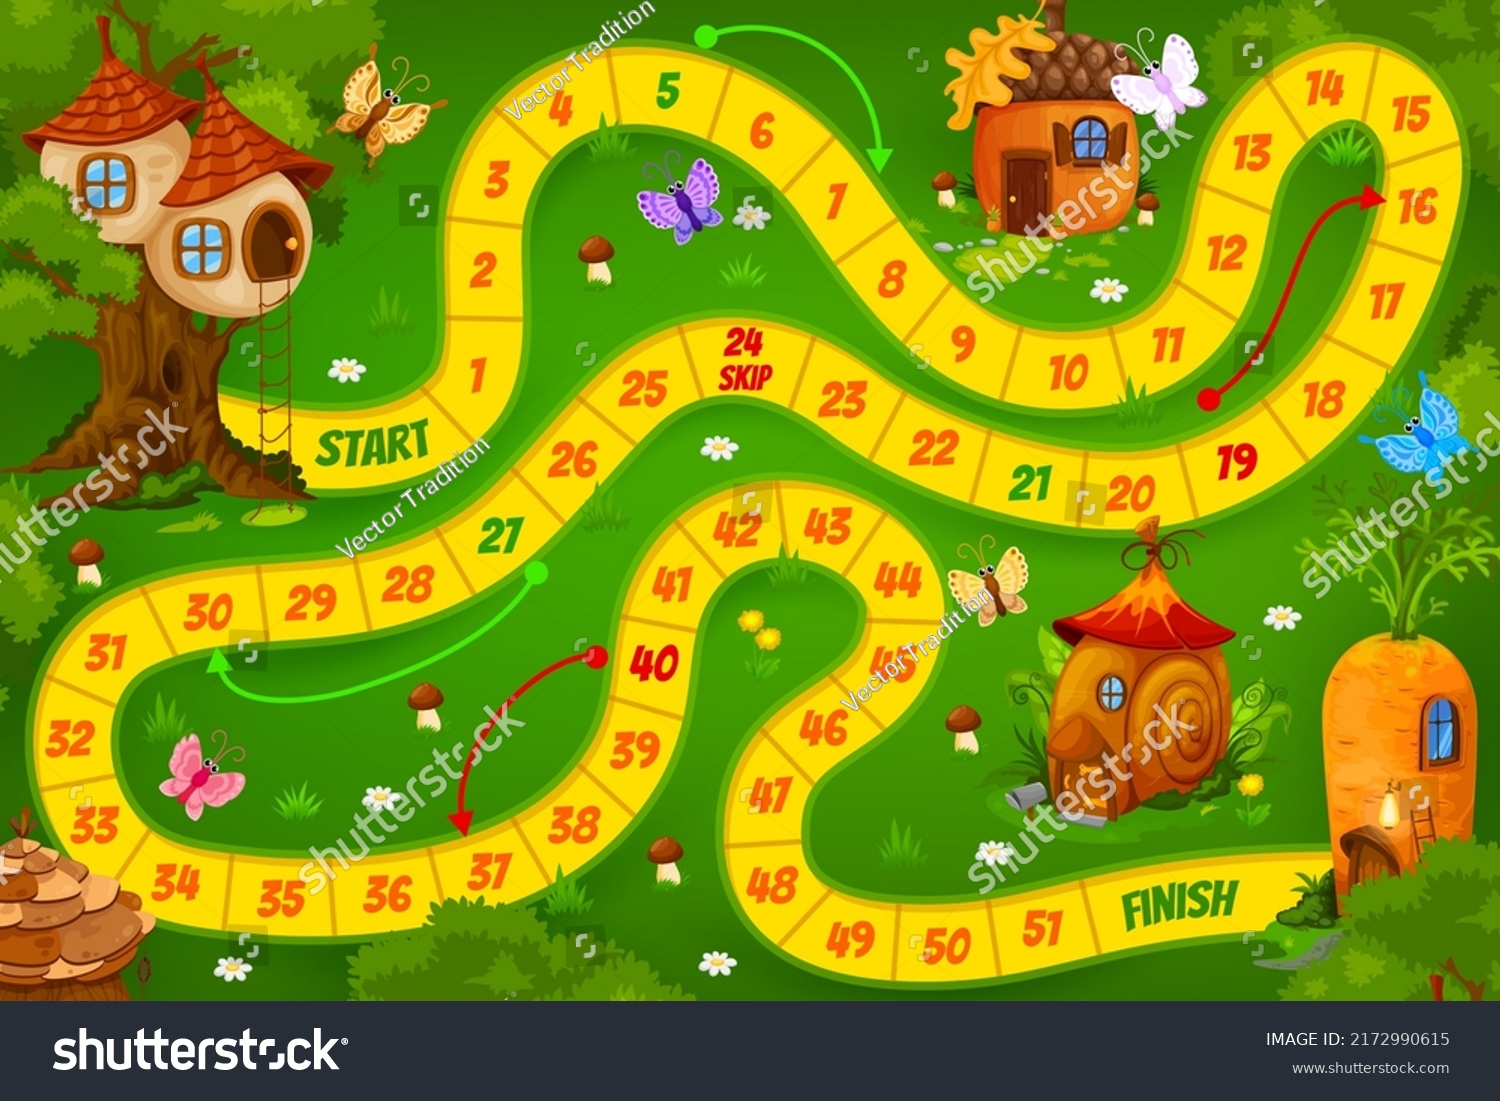 SVG of Kids board game. Nest, snail, acorn and carrot cartoon houses. Children riddle book vector page, boardgame or child puzzle game with dice rolling activity and fantasy houses, fairy dugout or elf hut svg